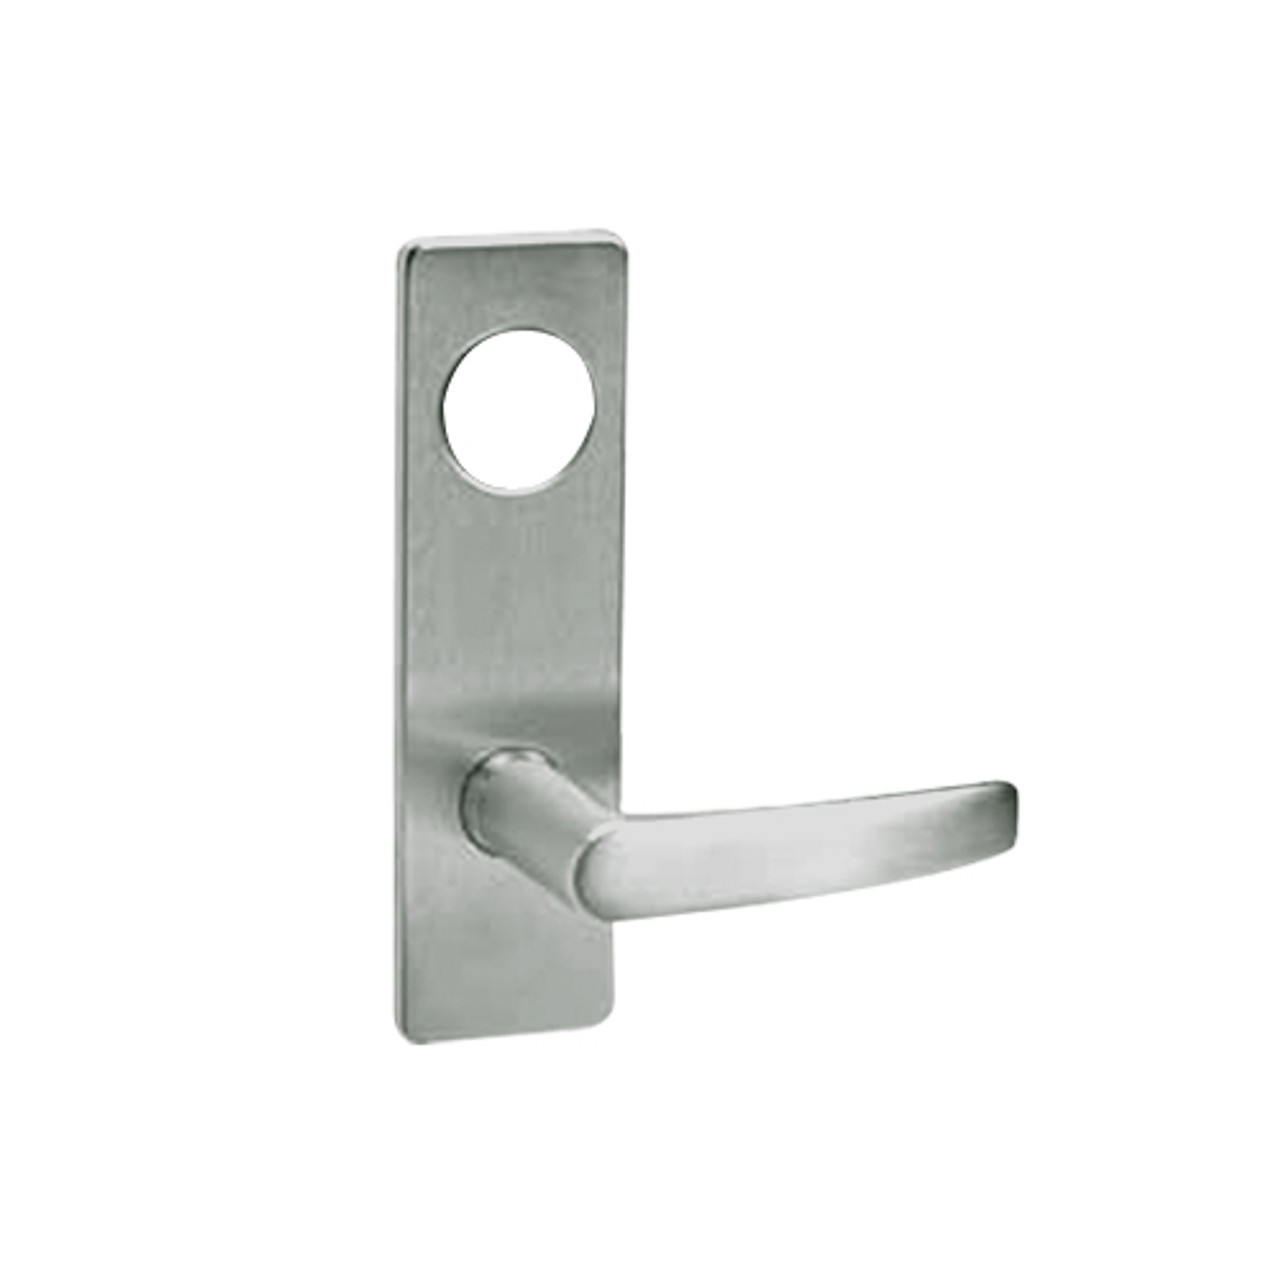 ML2024-ASN-619-CL6 Corbin Russwin ML2000 Series IC 6-Pin Less Core Mortise Entrance Locksets with Armstrong Lever in Satin Nickel